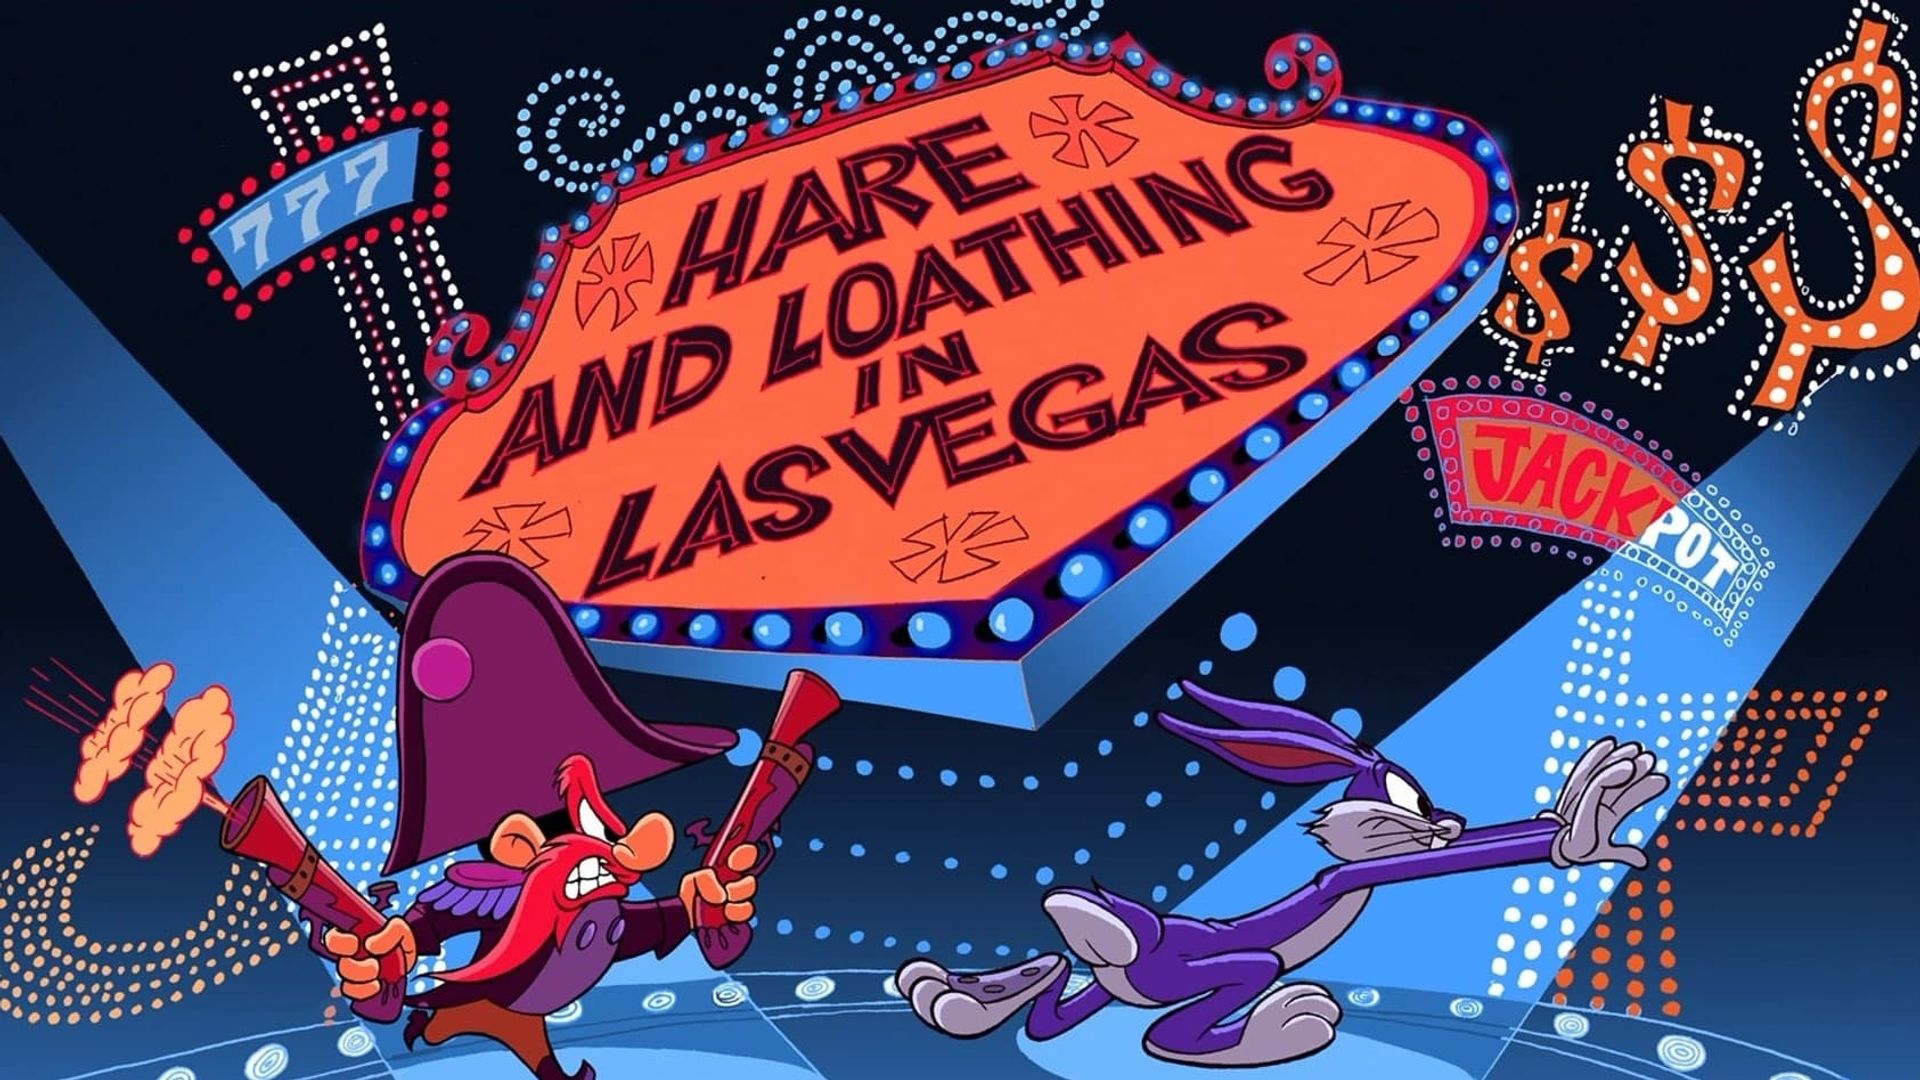 Hare and Loathing in Las Vegas background